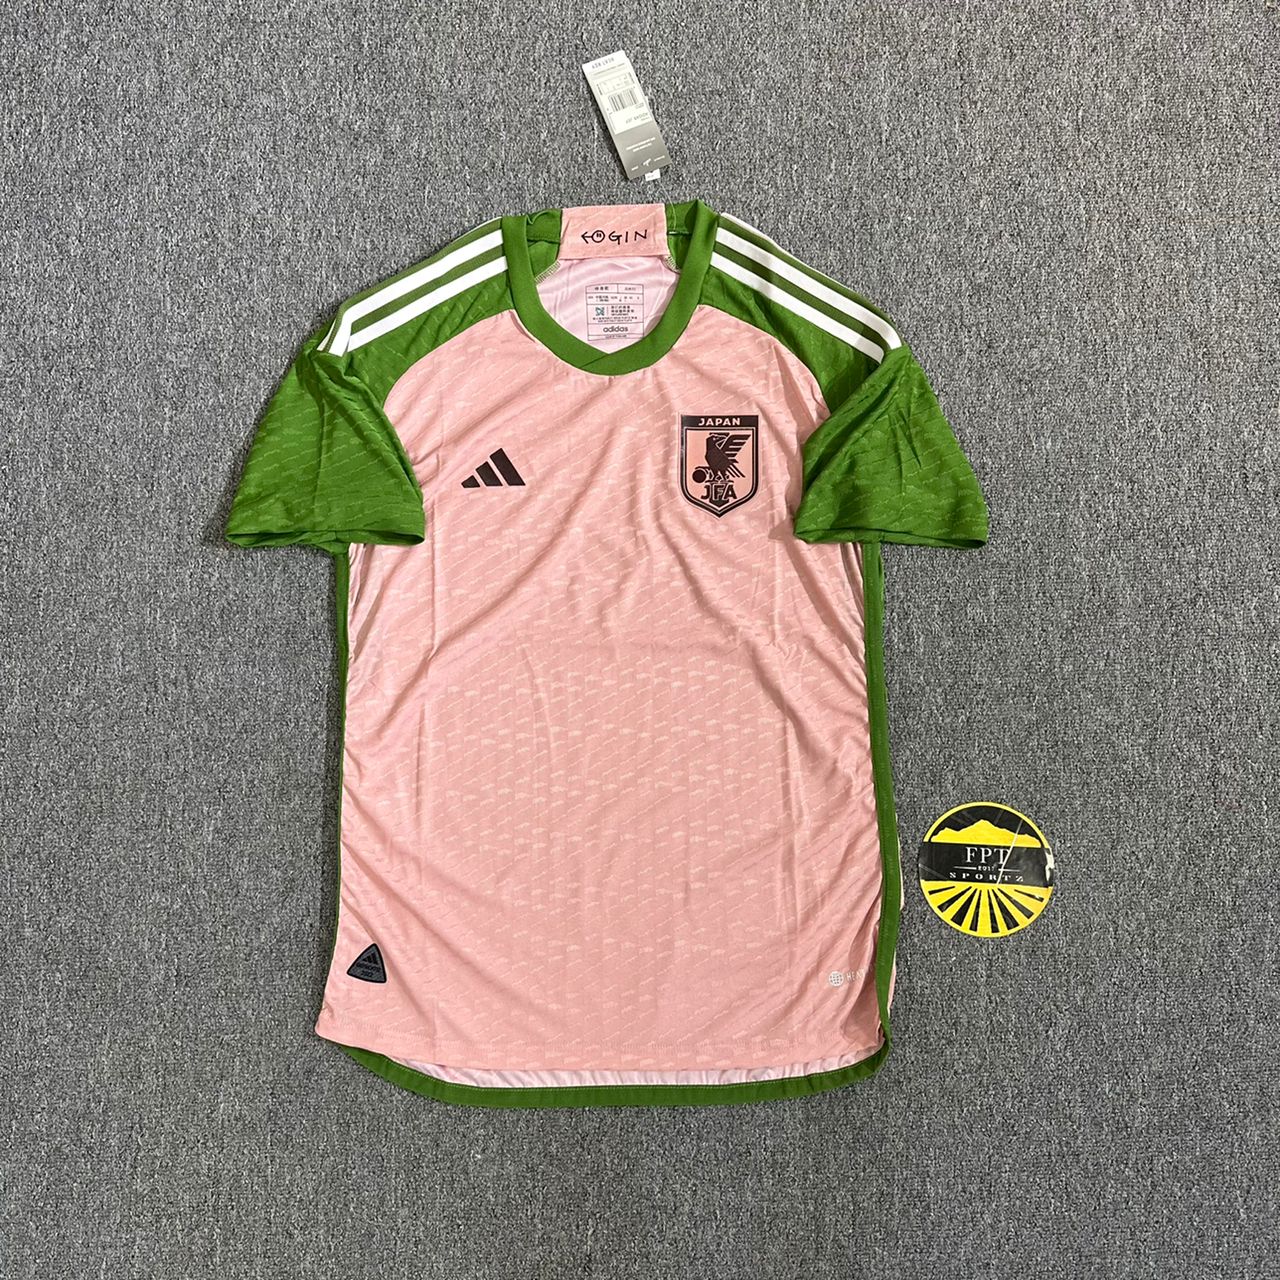 Japan Concept 4 Player Issue Kit